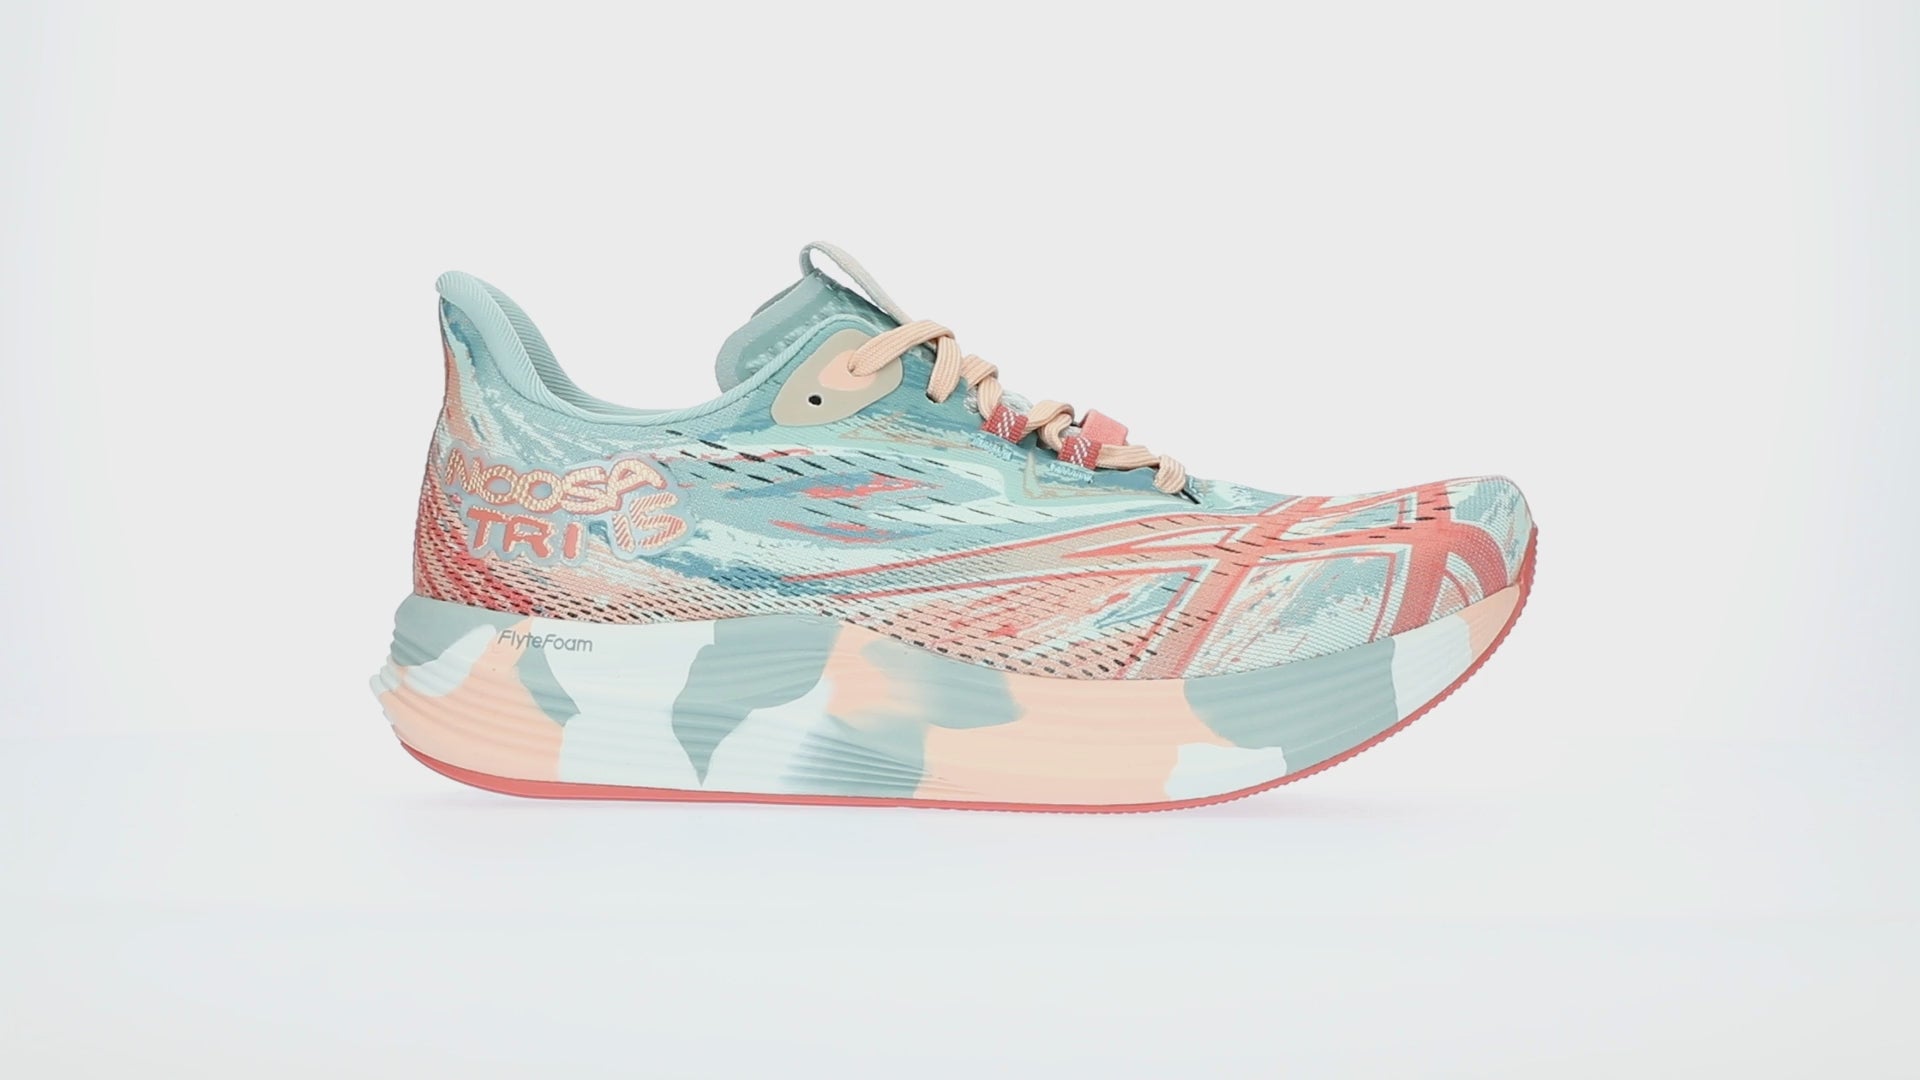 Asics Women's NOOSA TRI 15 Running Shoes in Restful Teal/Hot Pink